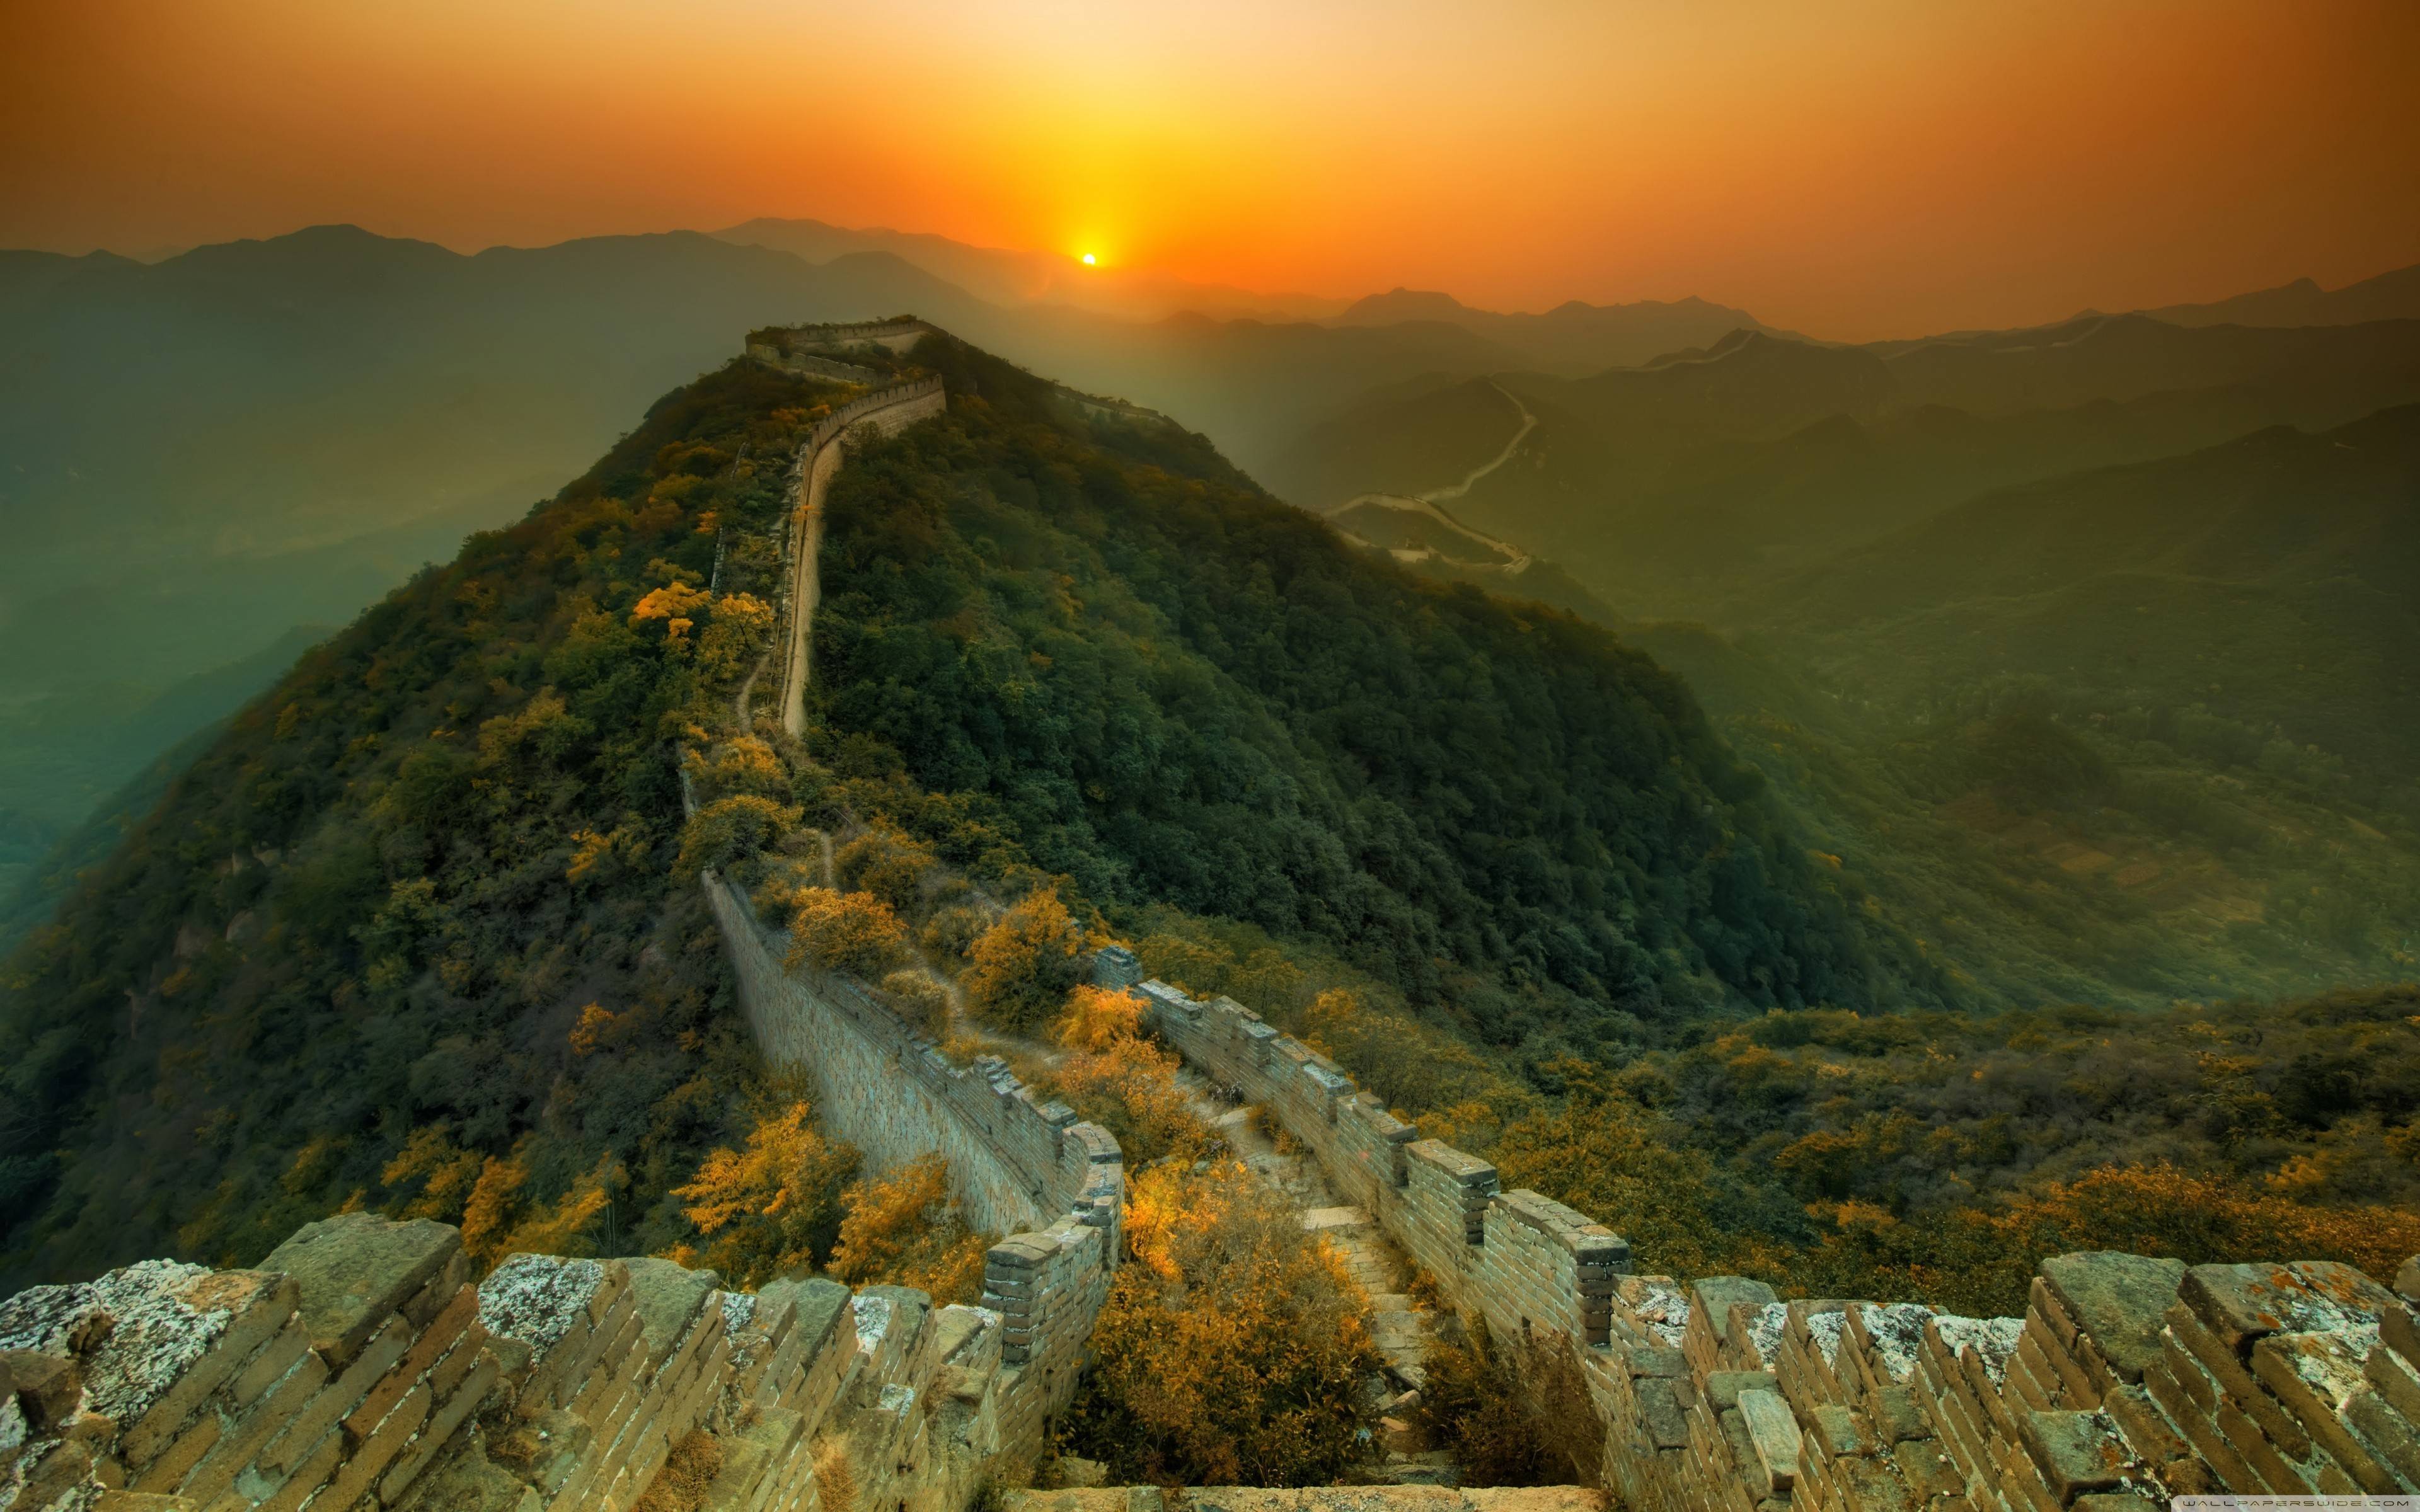 Overgrown section of the Great Wall - China